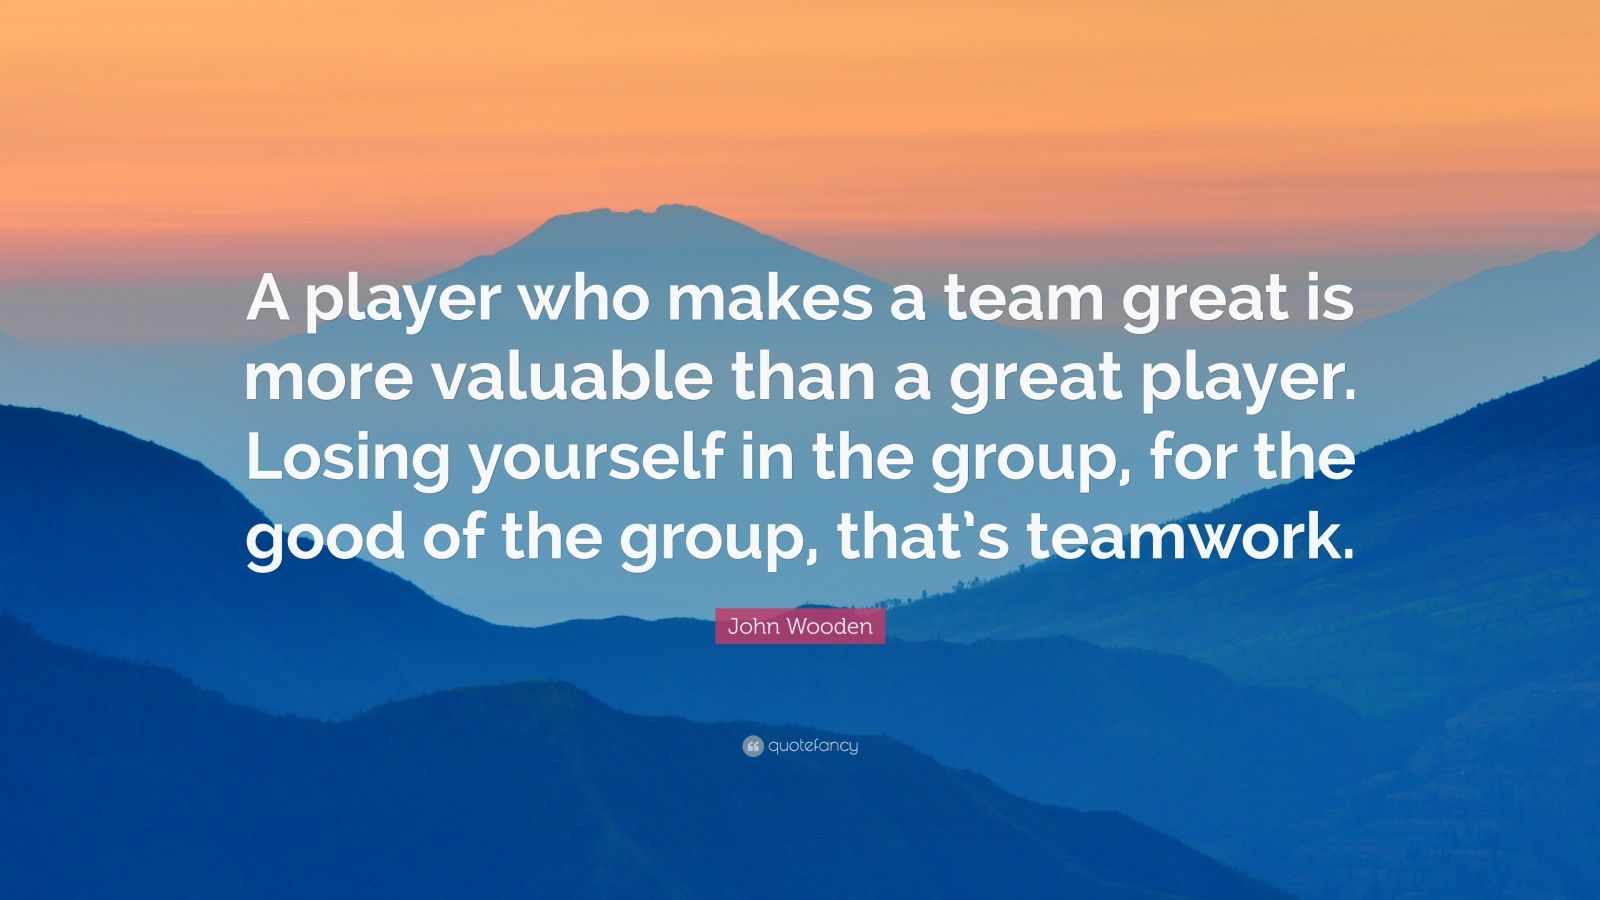 John Wooden Quote: “A player who makes a team great is more valuable